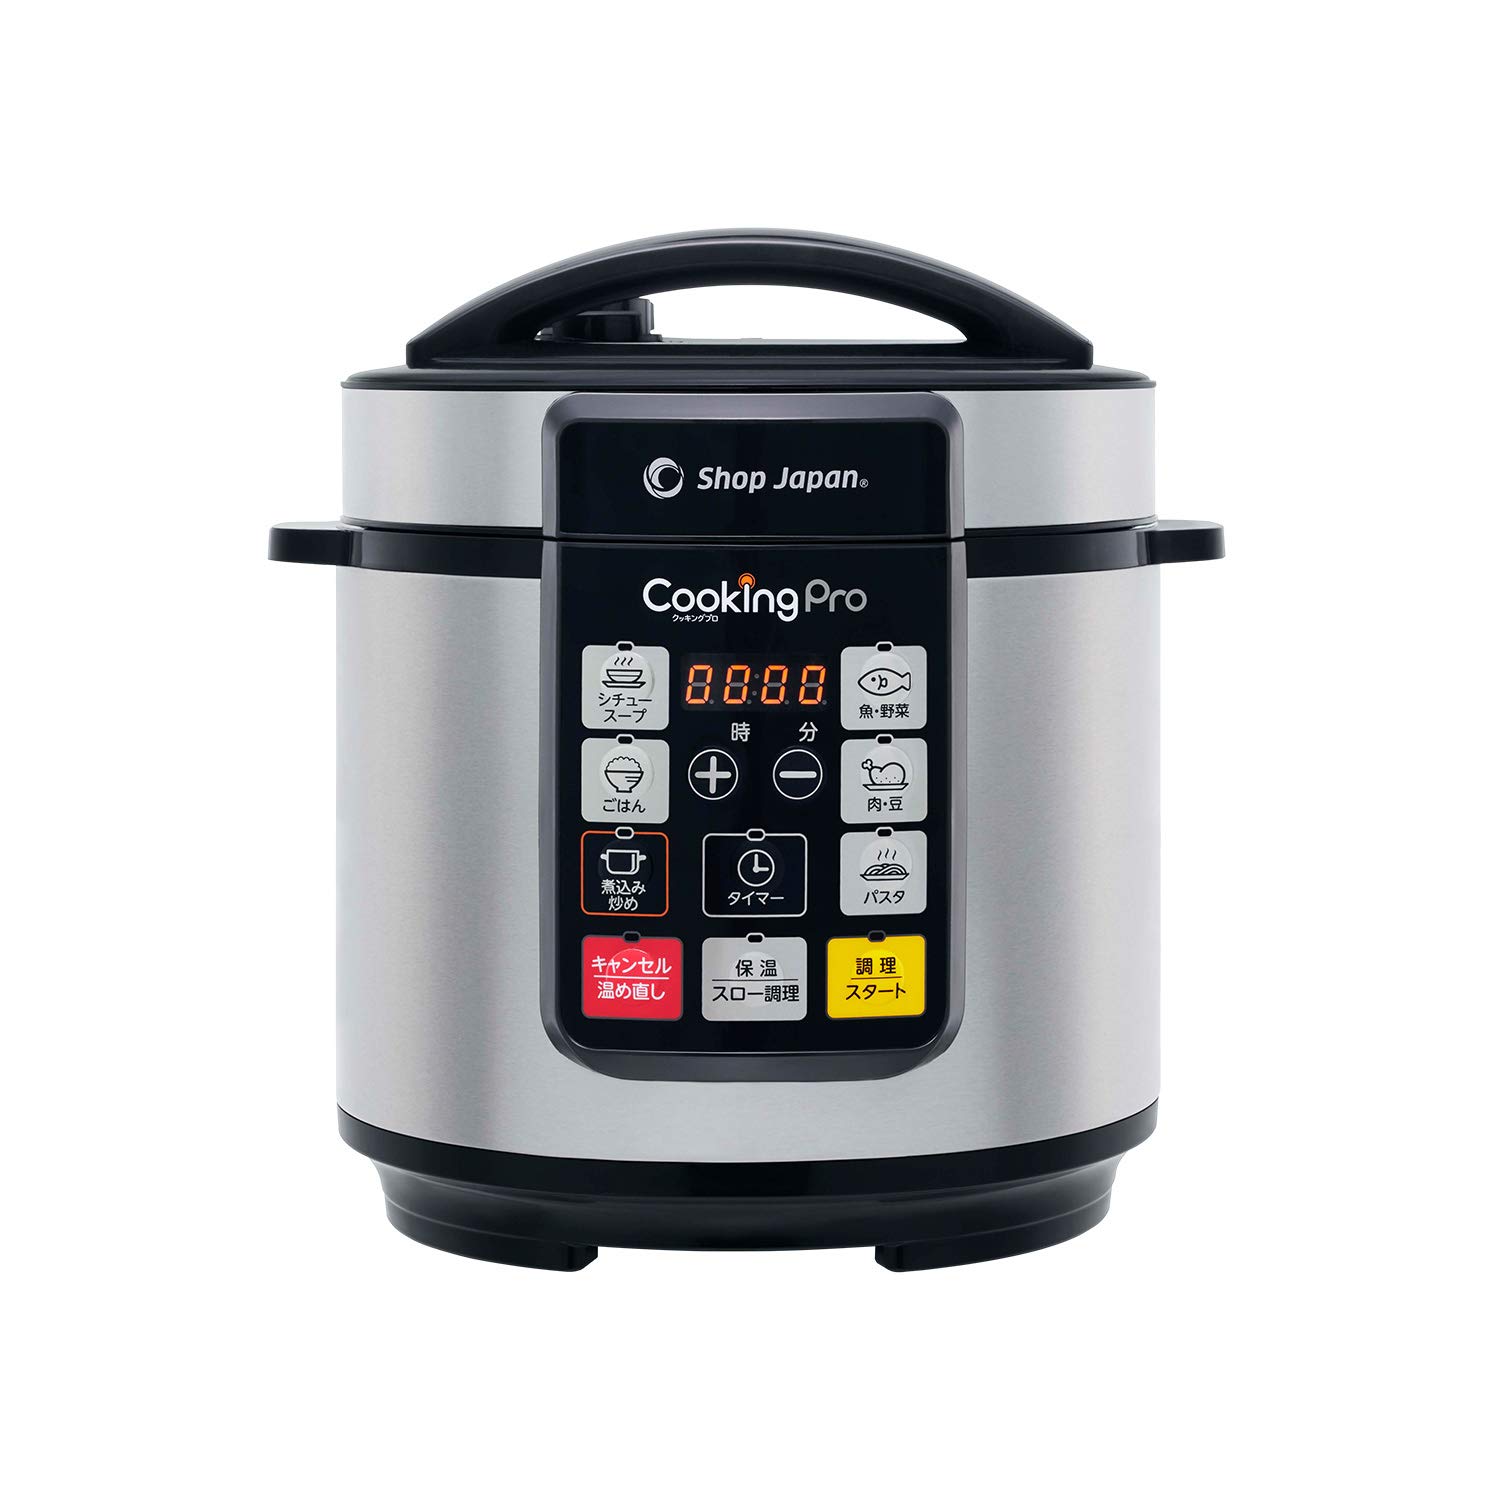 L) ZERO Minute Pressure Cooker For orders outside Japan 